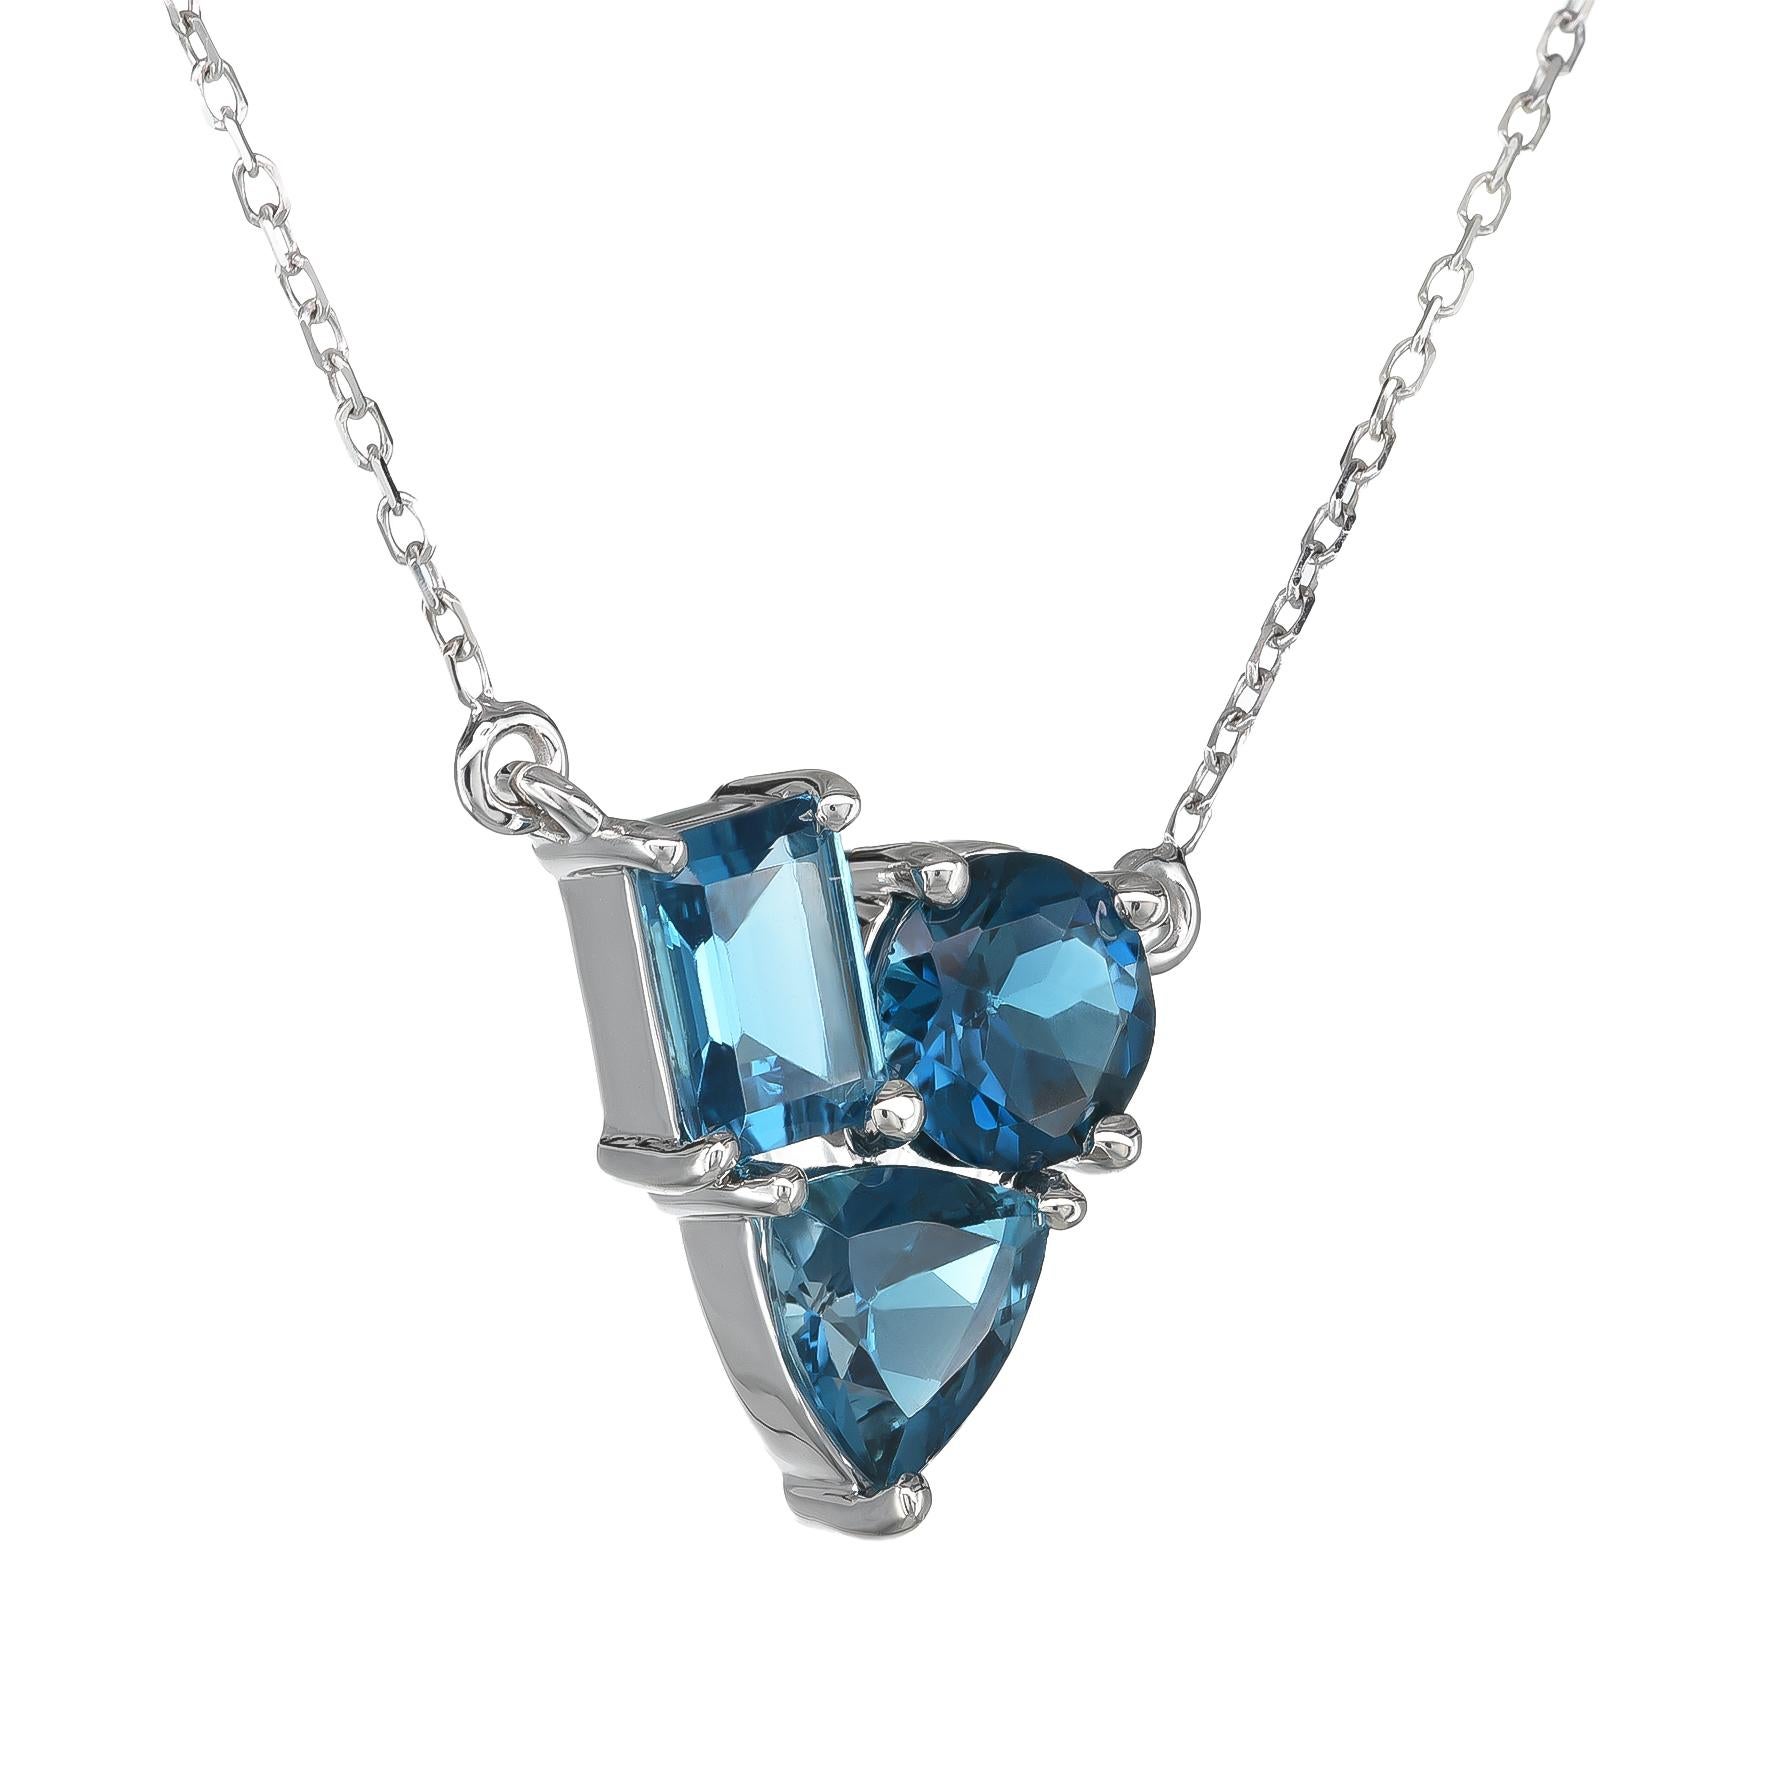 Immerse yourself in the deep, captivating hue of the London Blue Topaz, elegantly showcased in a 14K white gold pendant. This stunning piece brings together the artistry of fine jewelry design and the fascinating beauty of natural gemstones, perfect